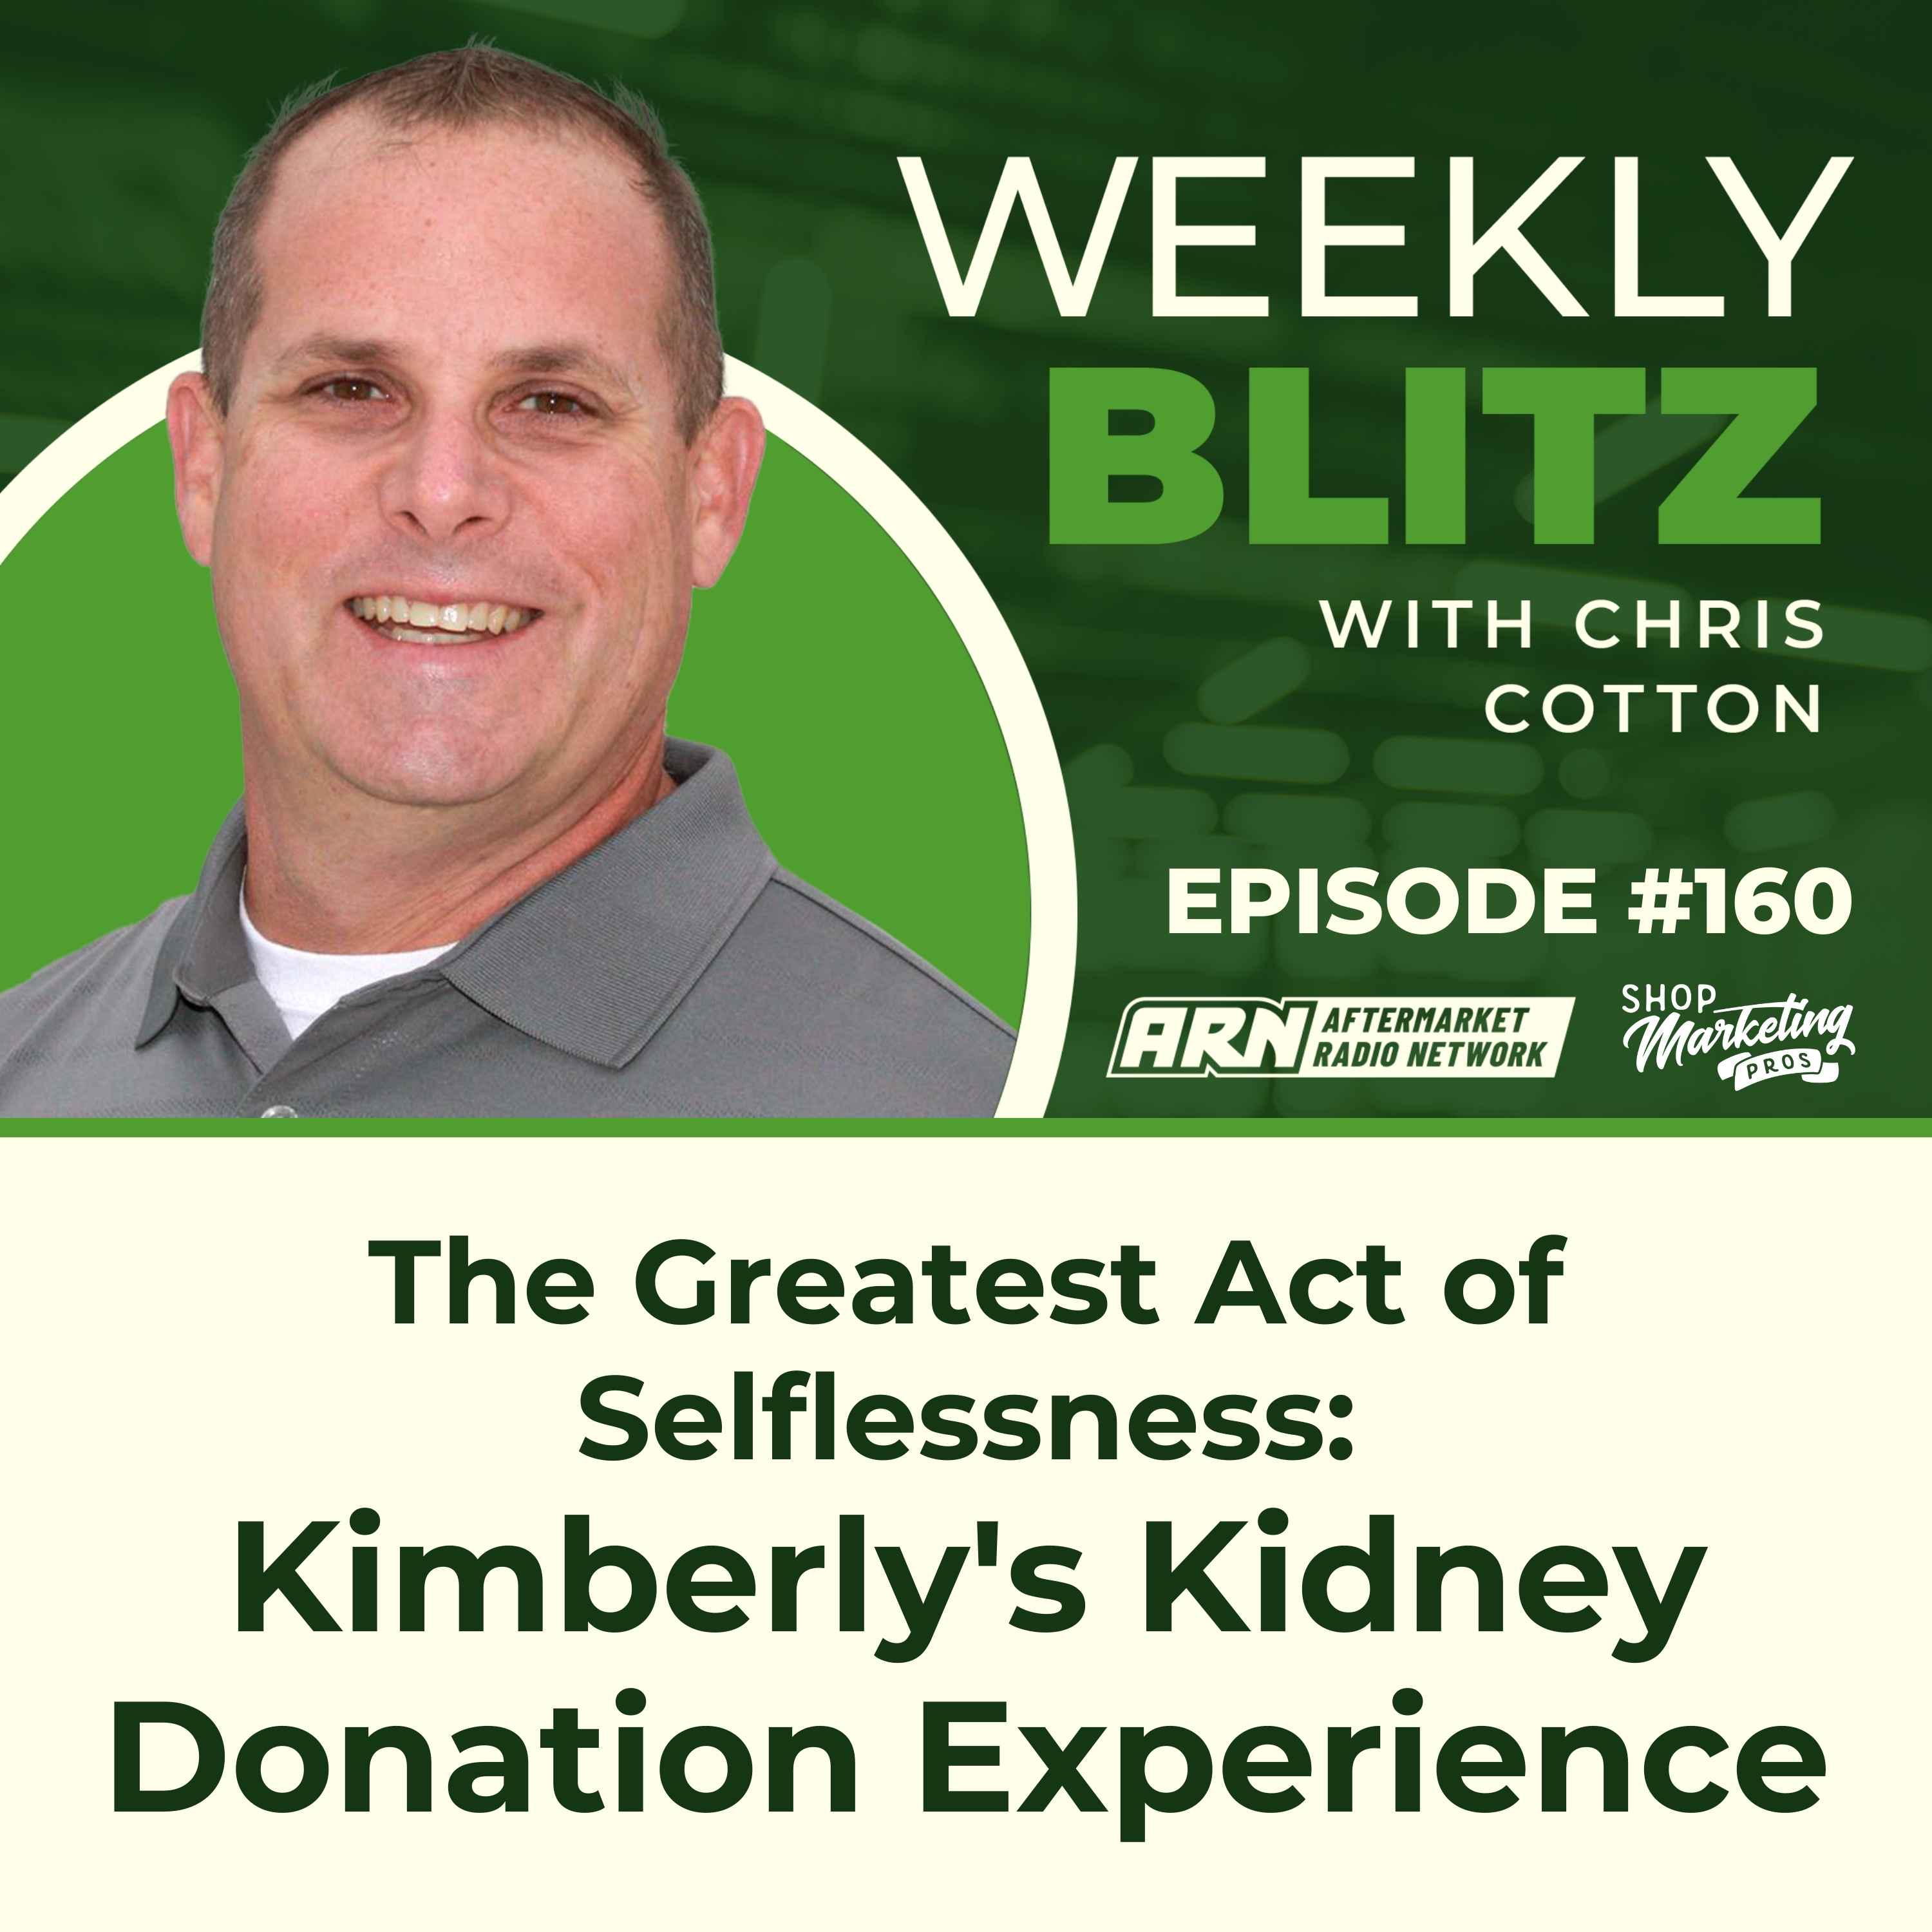 The Greatest Act of Selflessness: Kimberly's Kidney Donation Experience [E160] - Chris Cotton Weekly Blitz